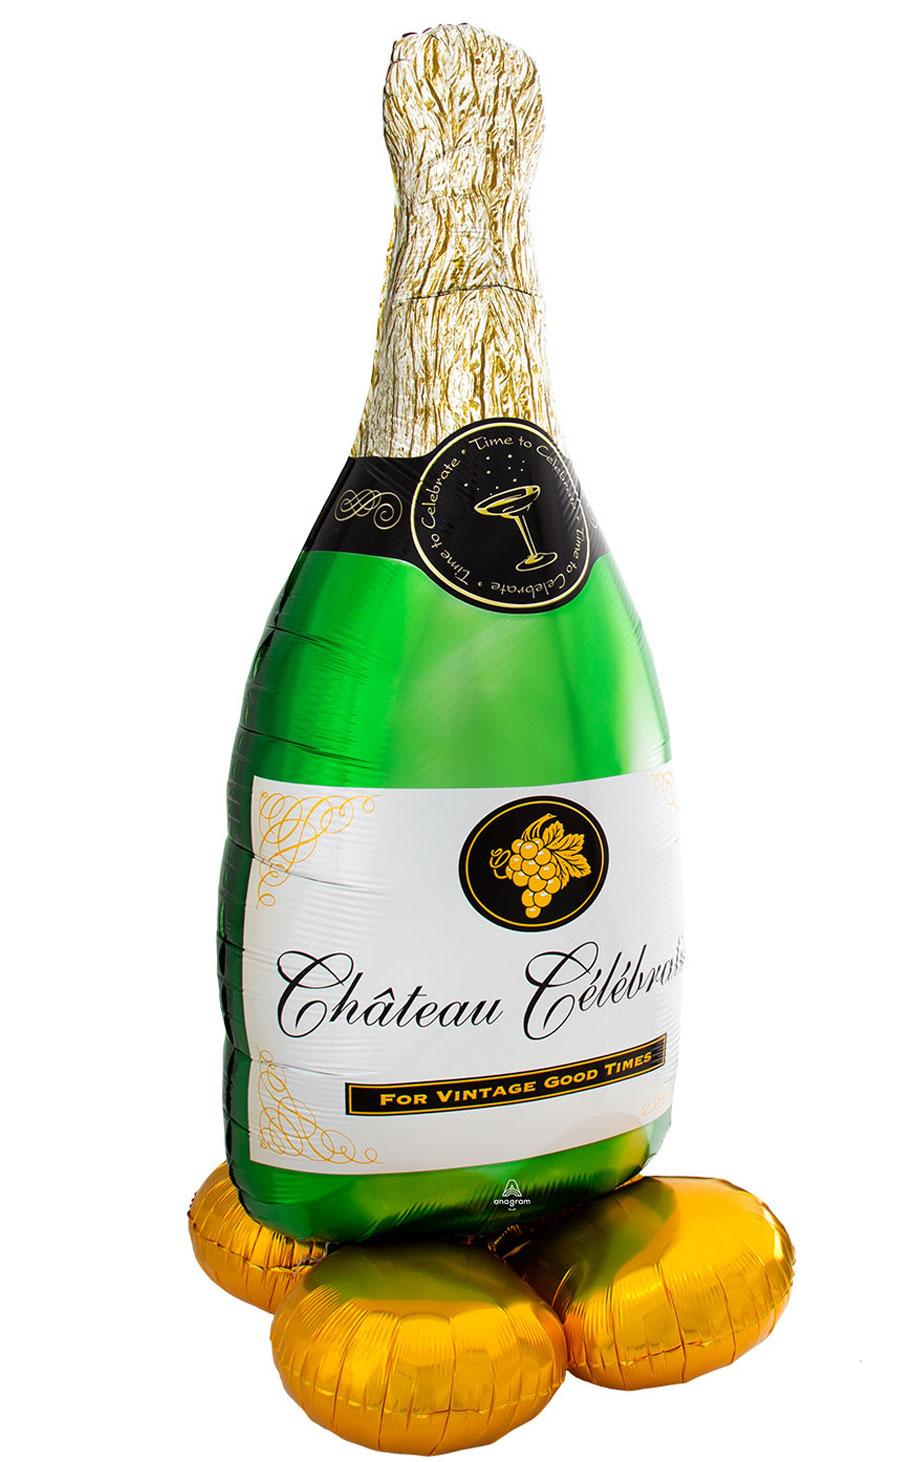 Champagne Bottle Airloonz Air-Fill Character Balloon by Amscan 8312011 available from the collection here at Karnival Costumes online party shop